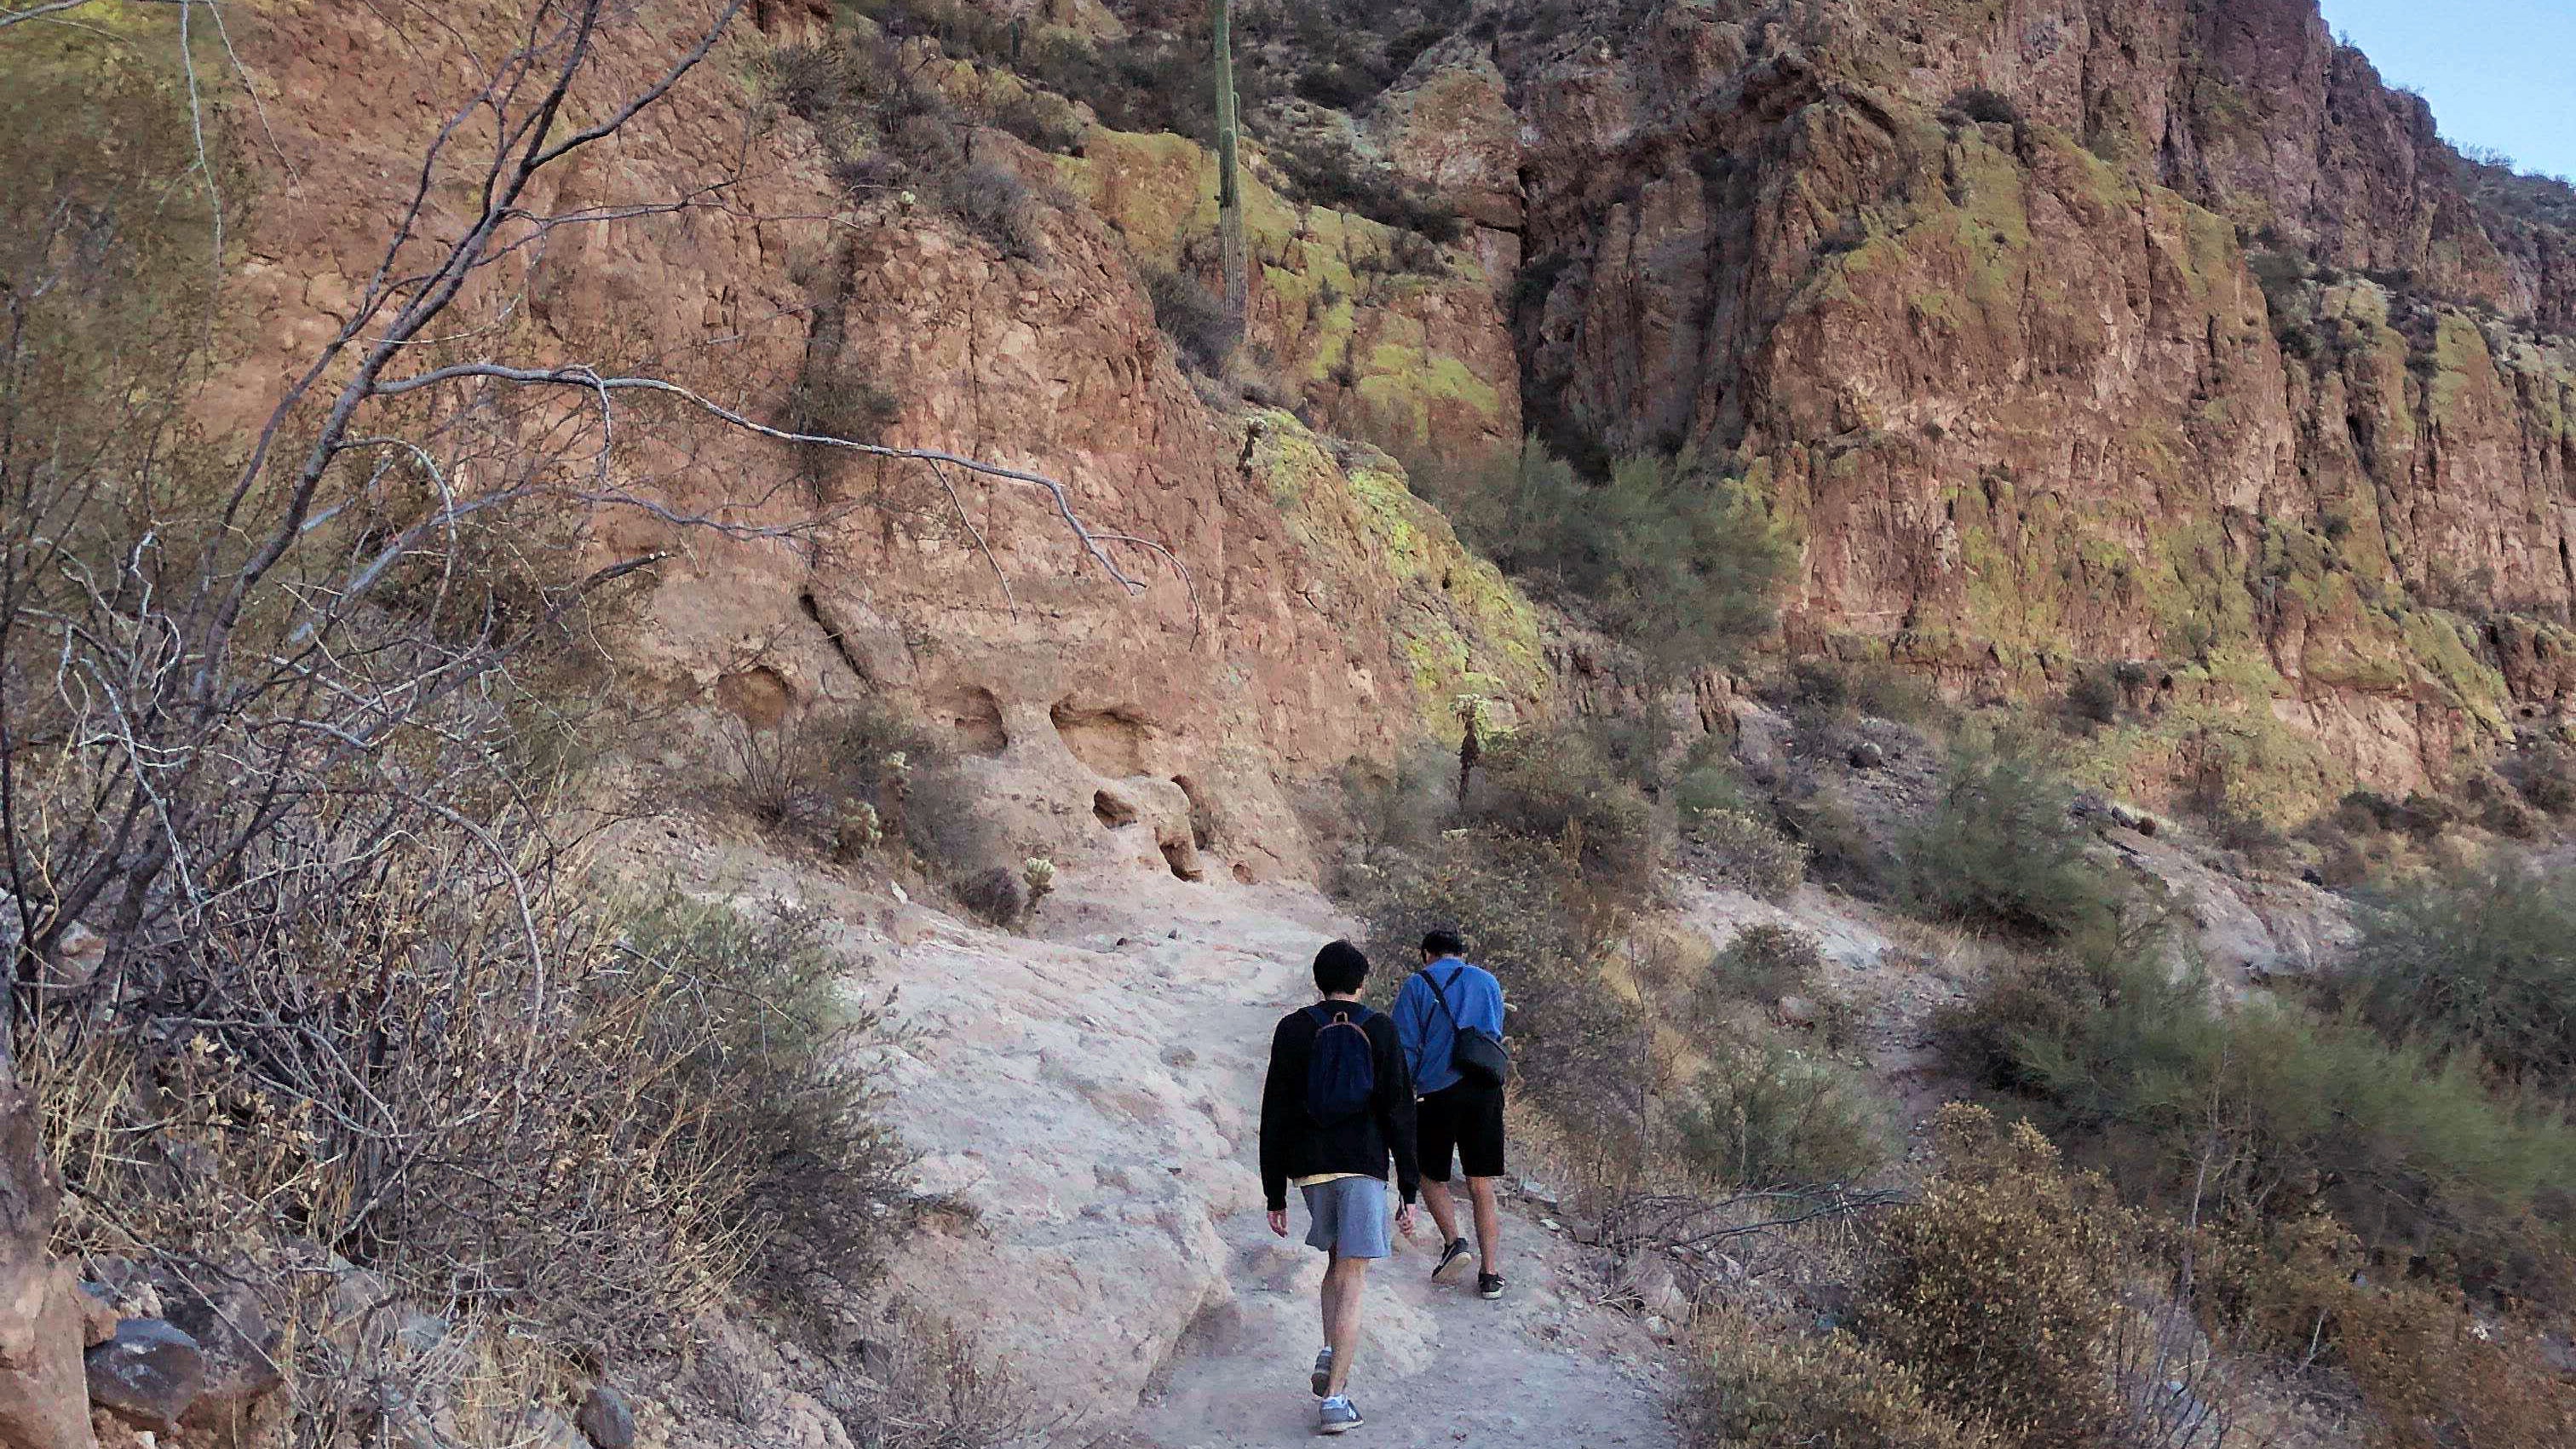 Image of two people hiking in the desert